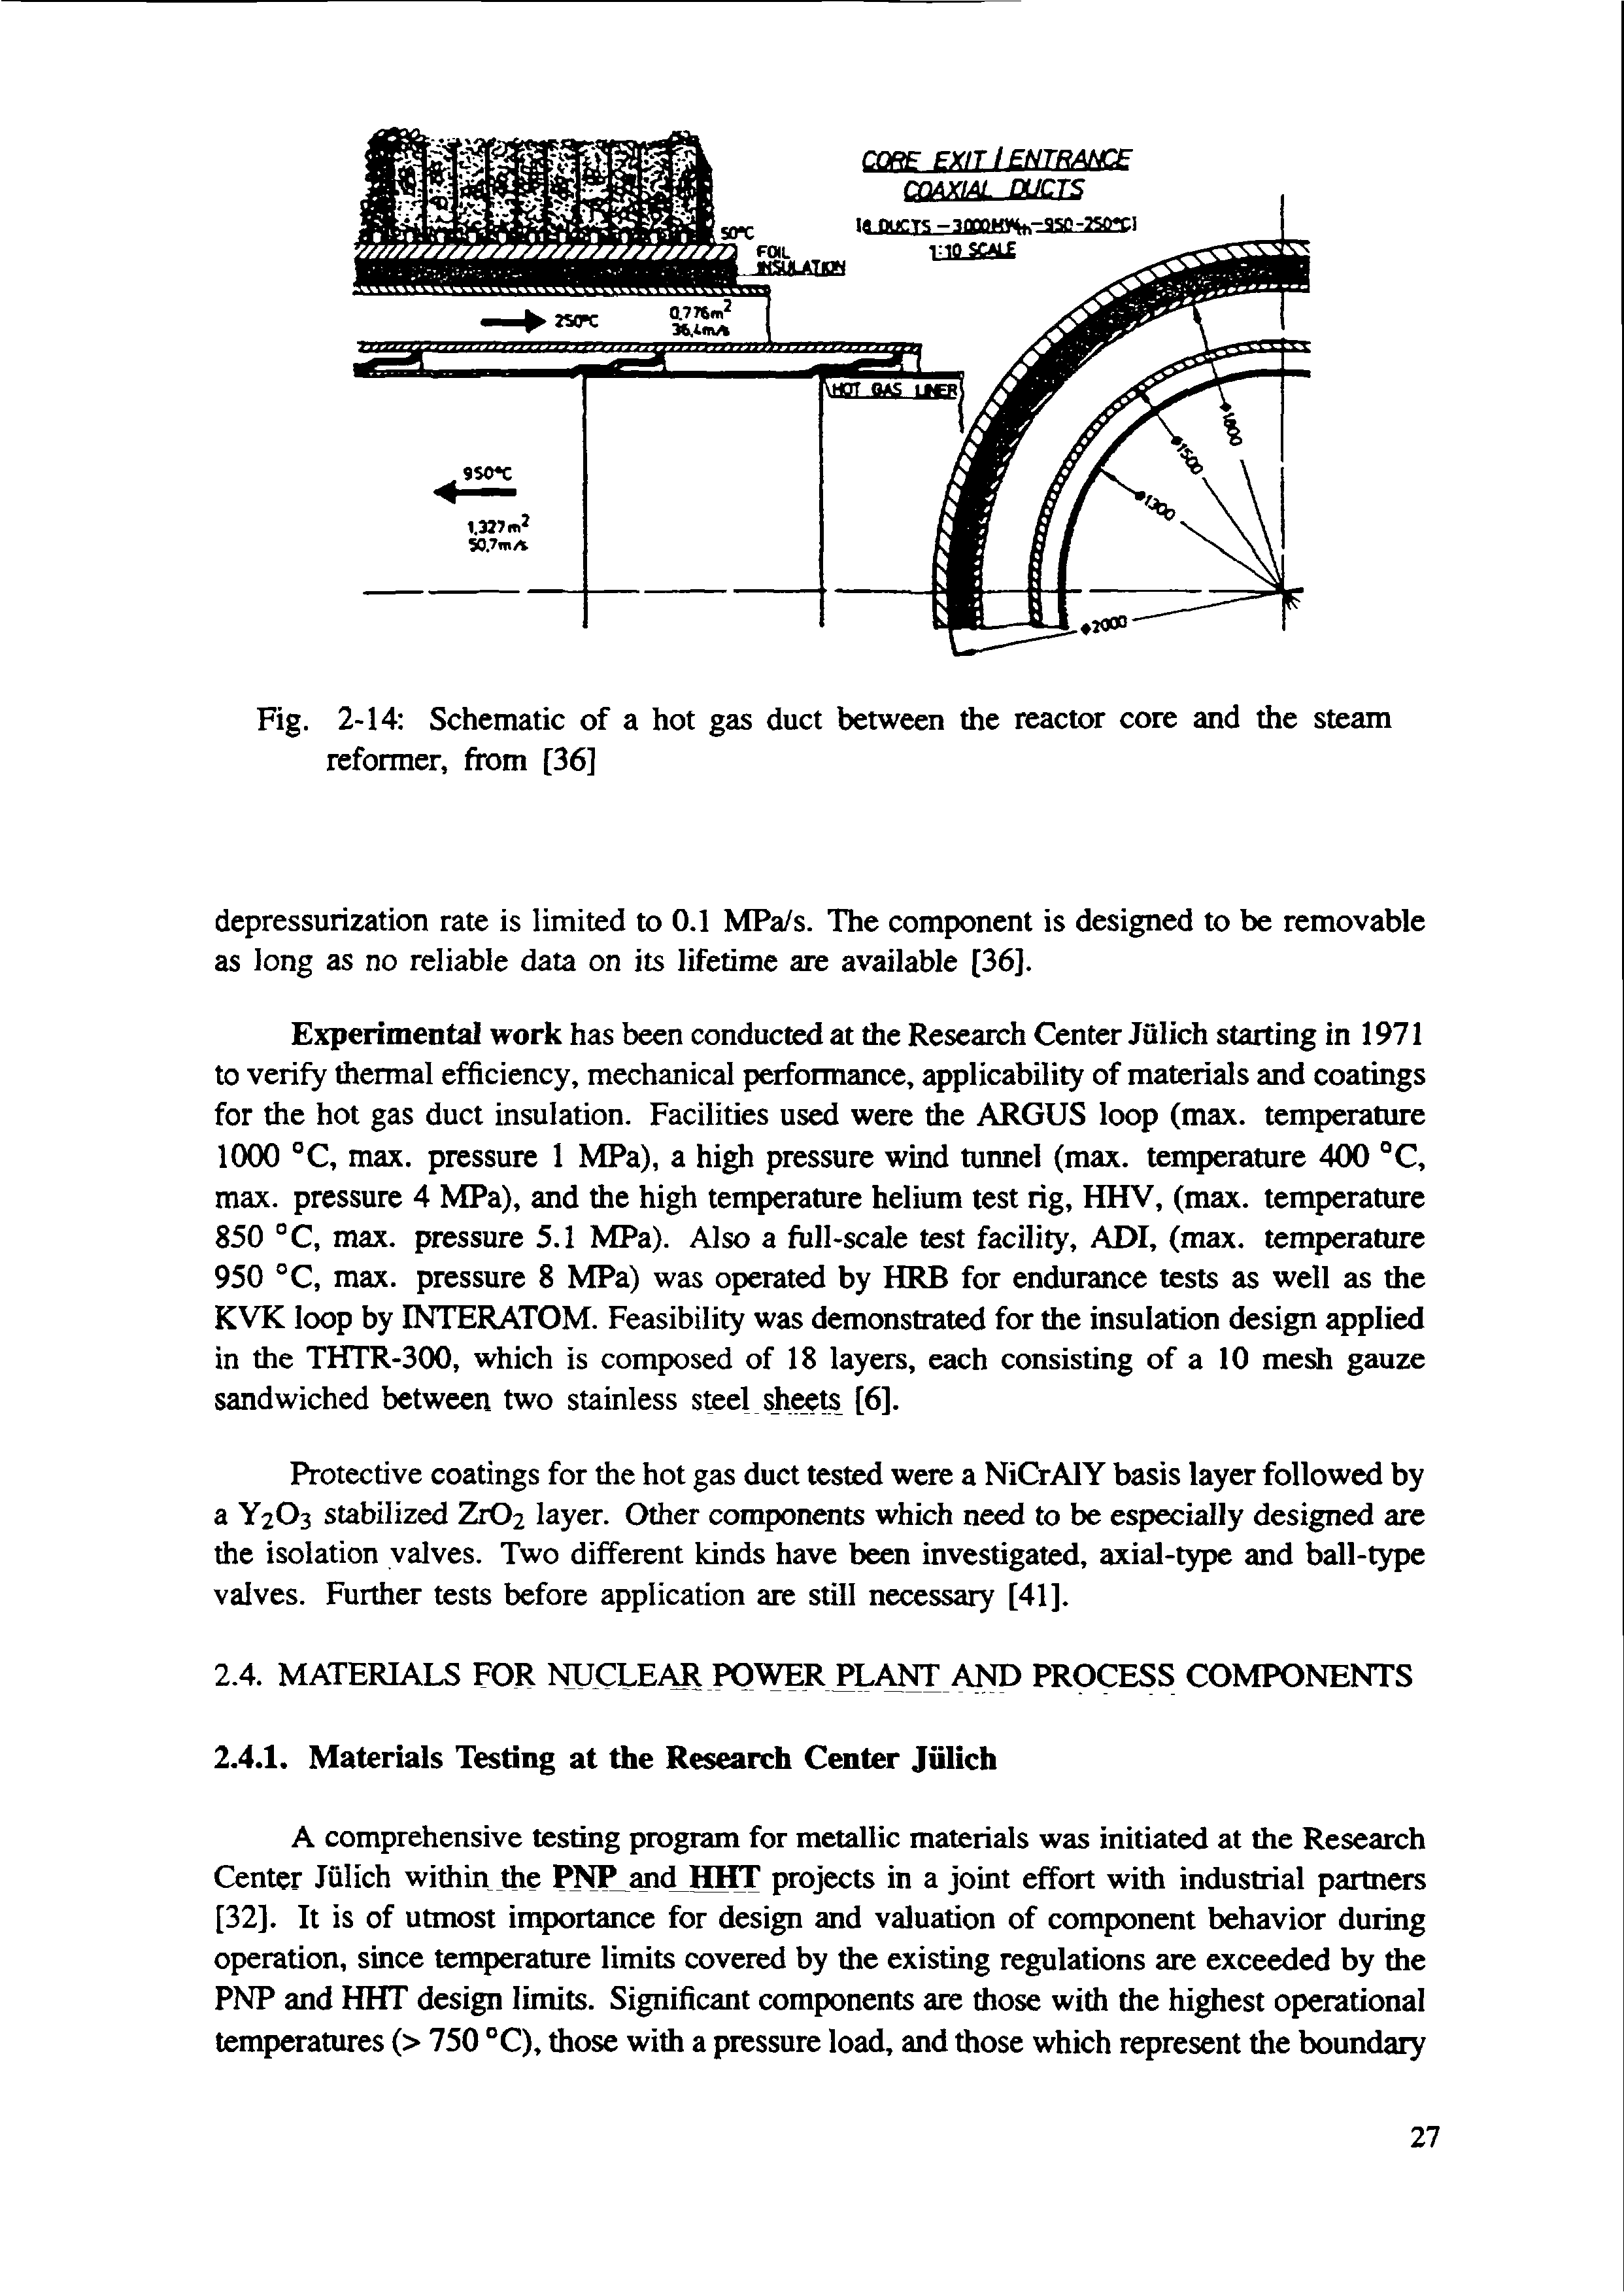 Fig. 2-14 Schematic of a hot gas duct between the reactor core and the steam reformer, from [36]...